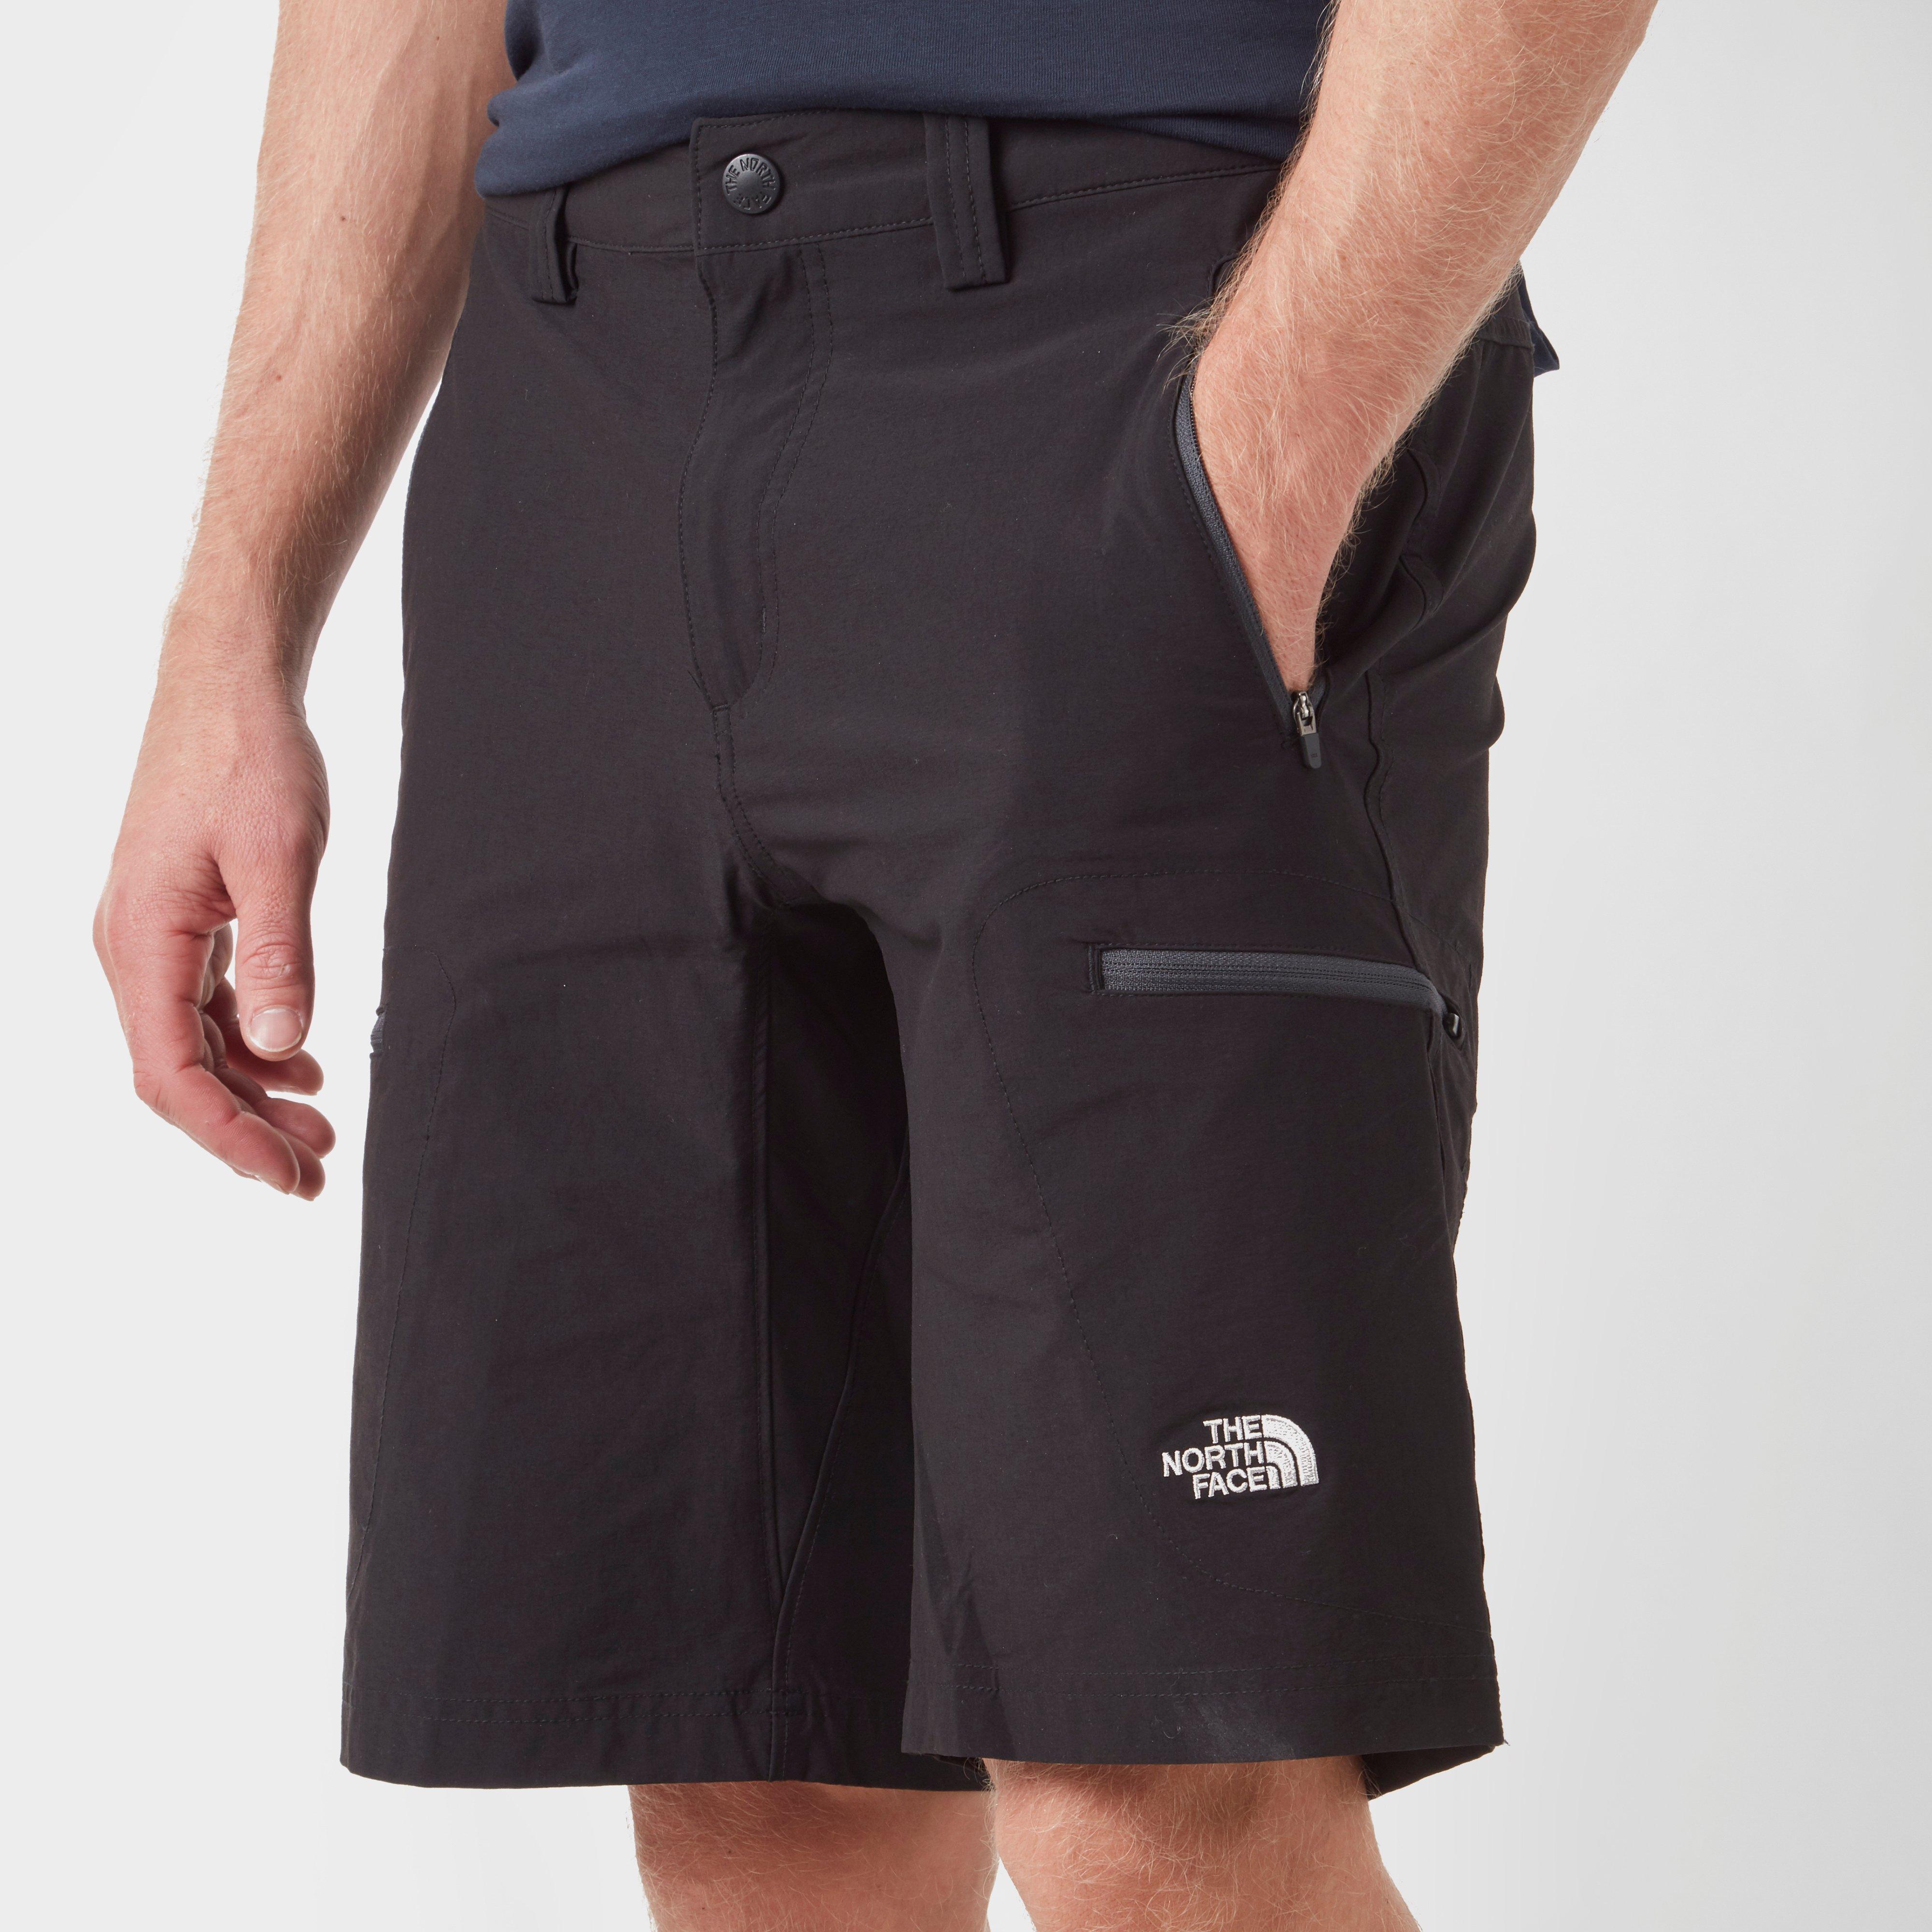 the north face black shorts